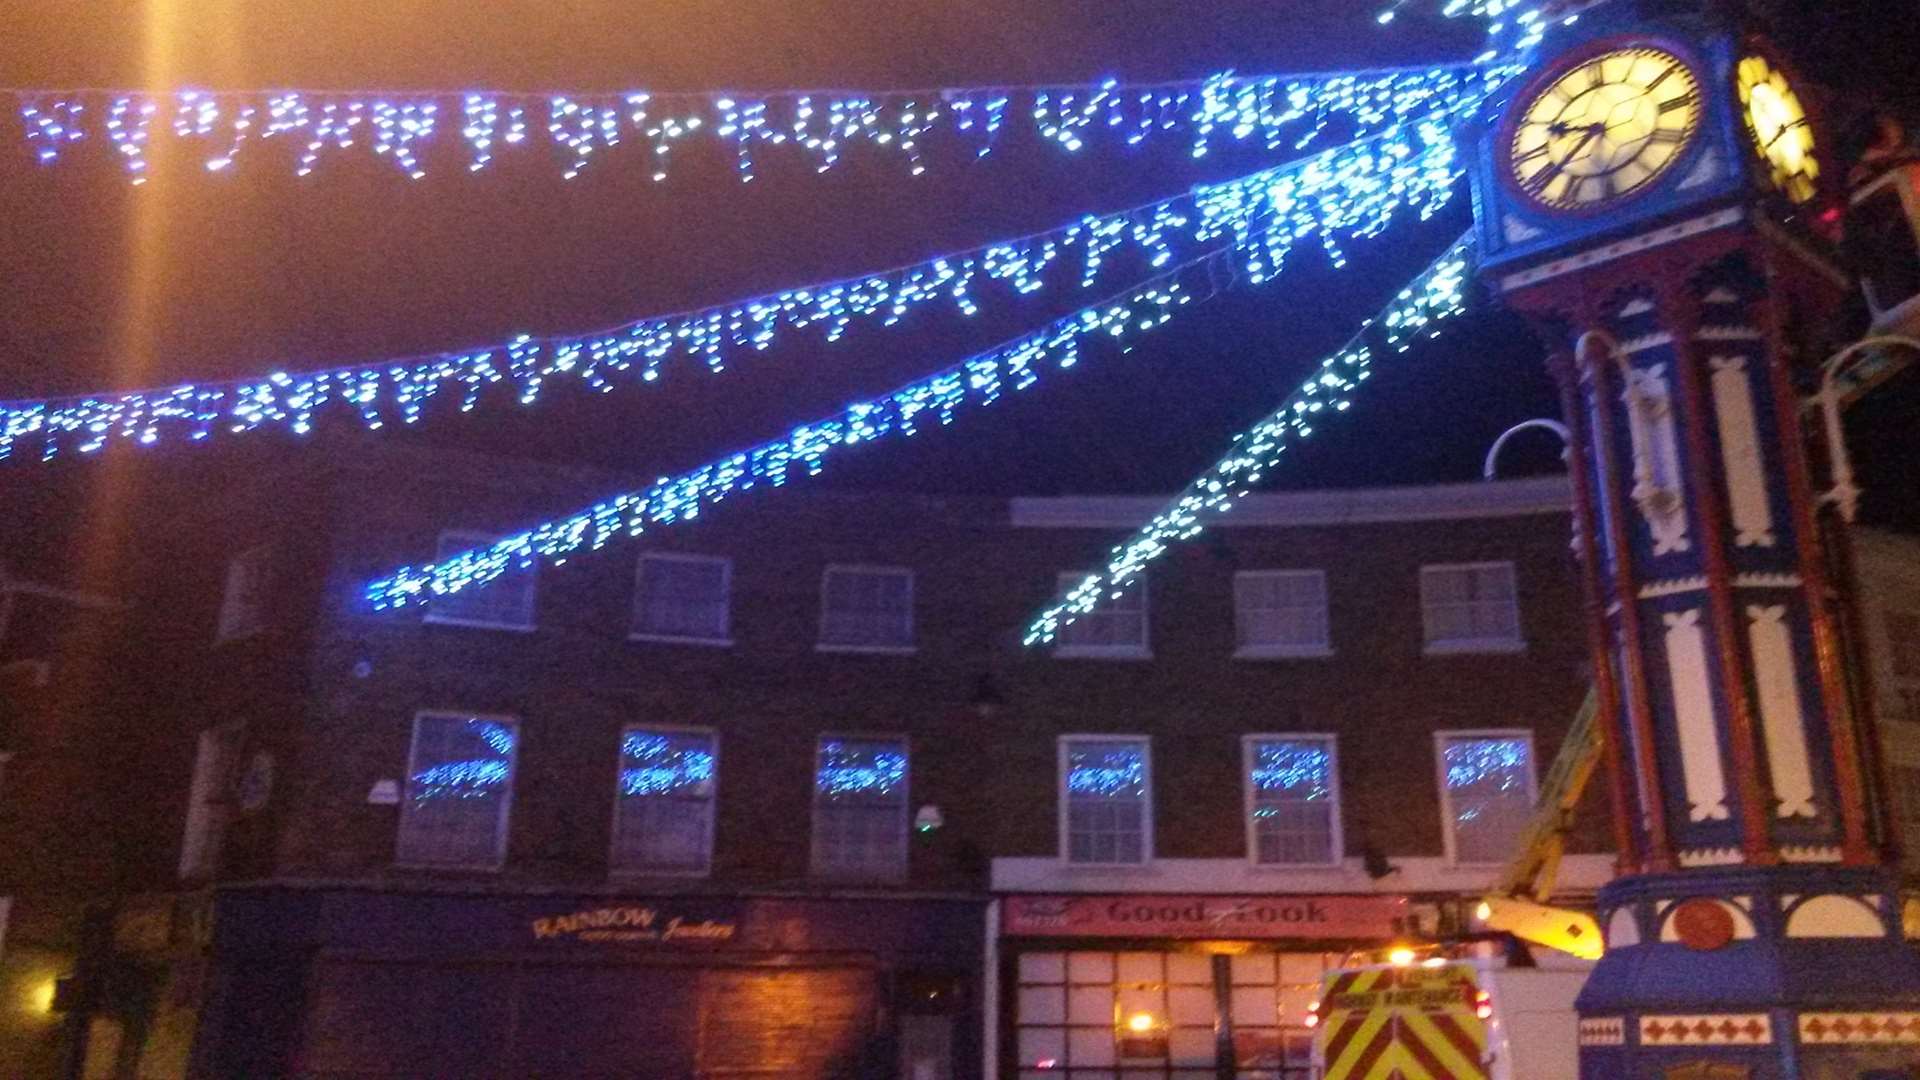 The town centre Christmas lights